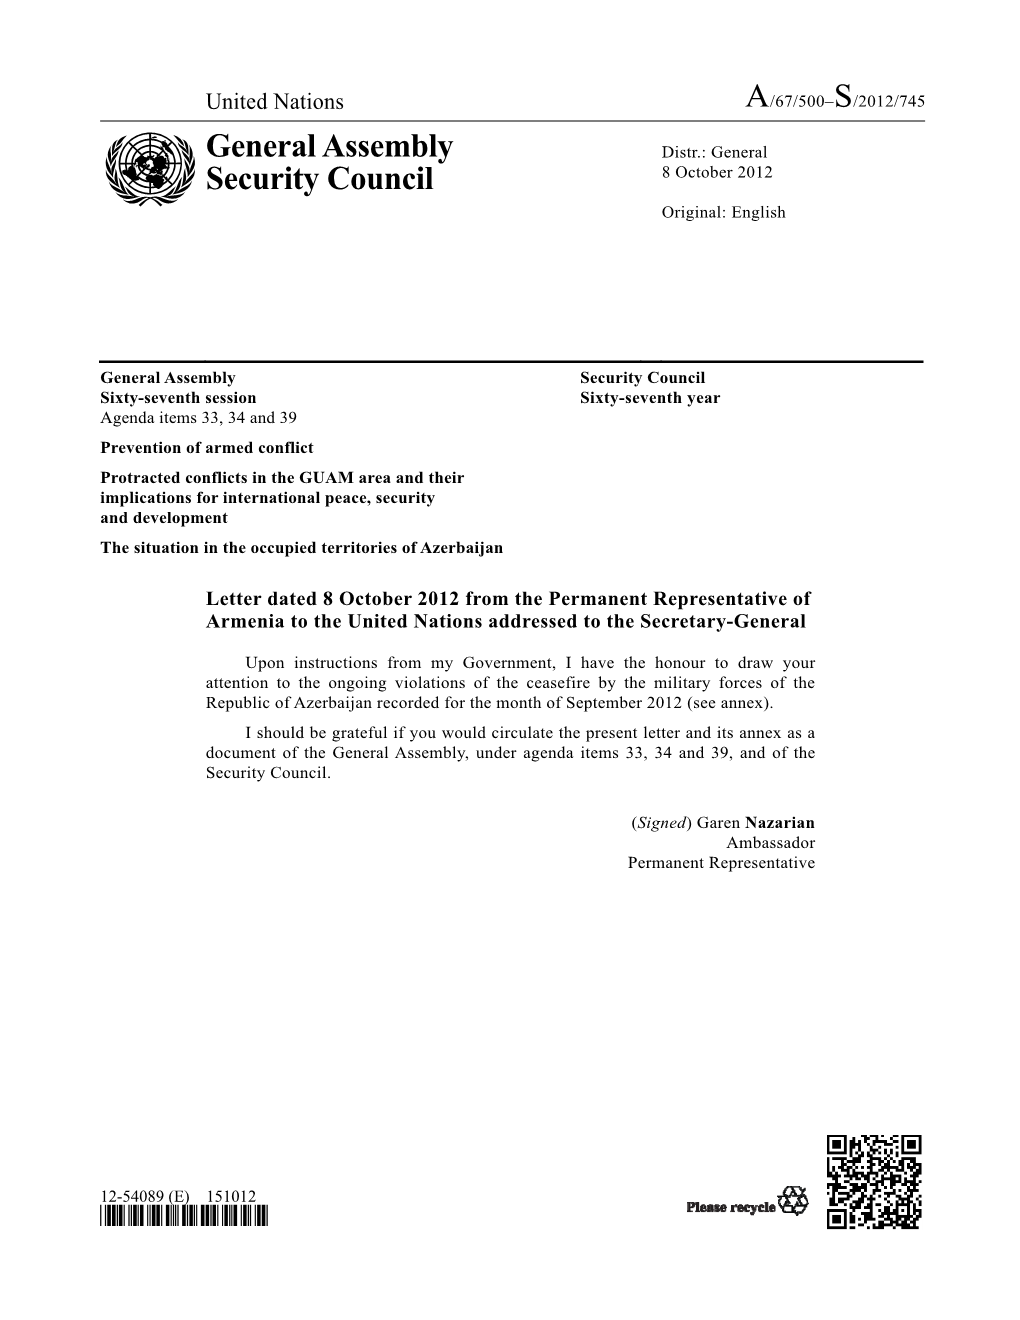 General Assembly Security Council Sixty-Seventh Session Sixty-Seventh Year Agenda Items 33, 34 and 39